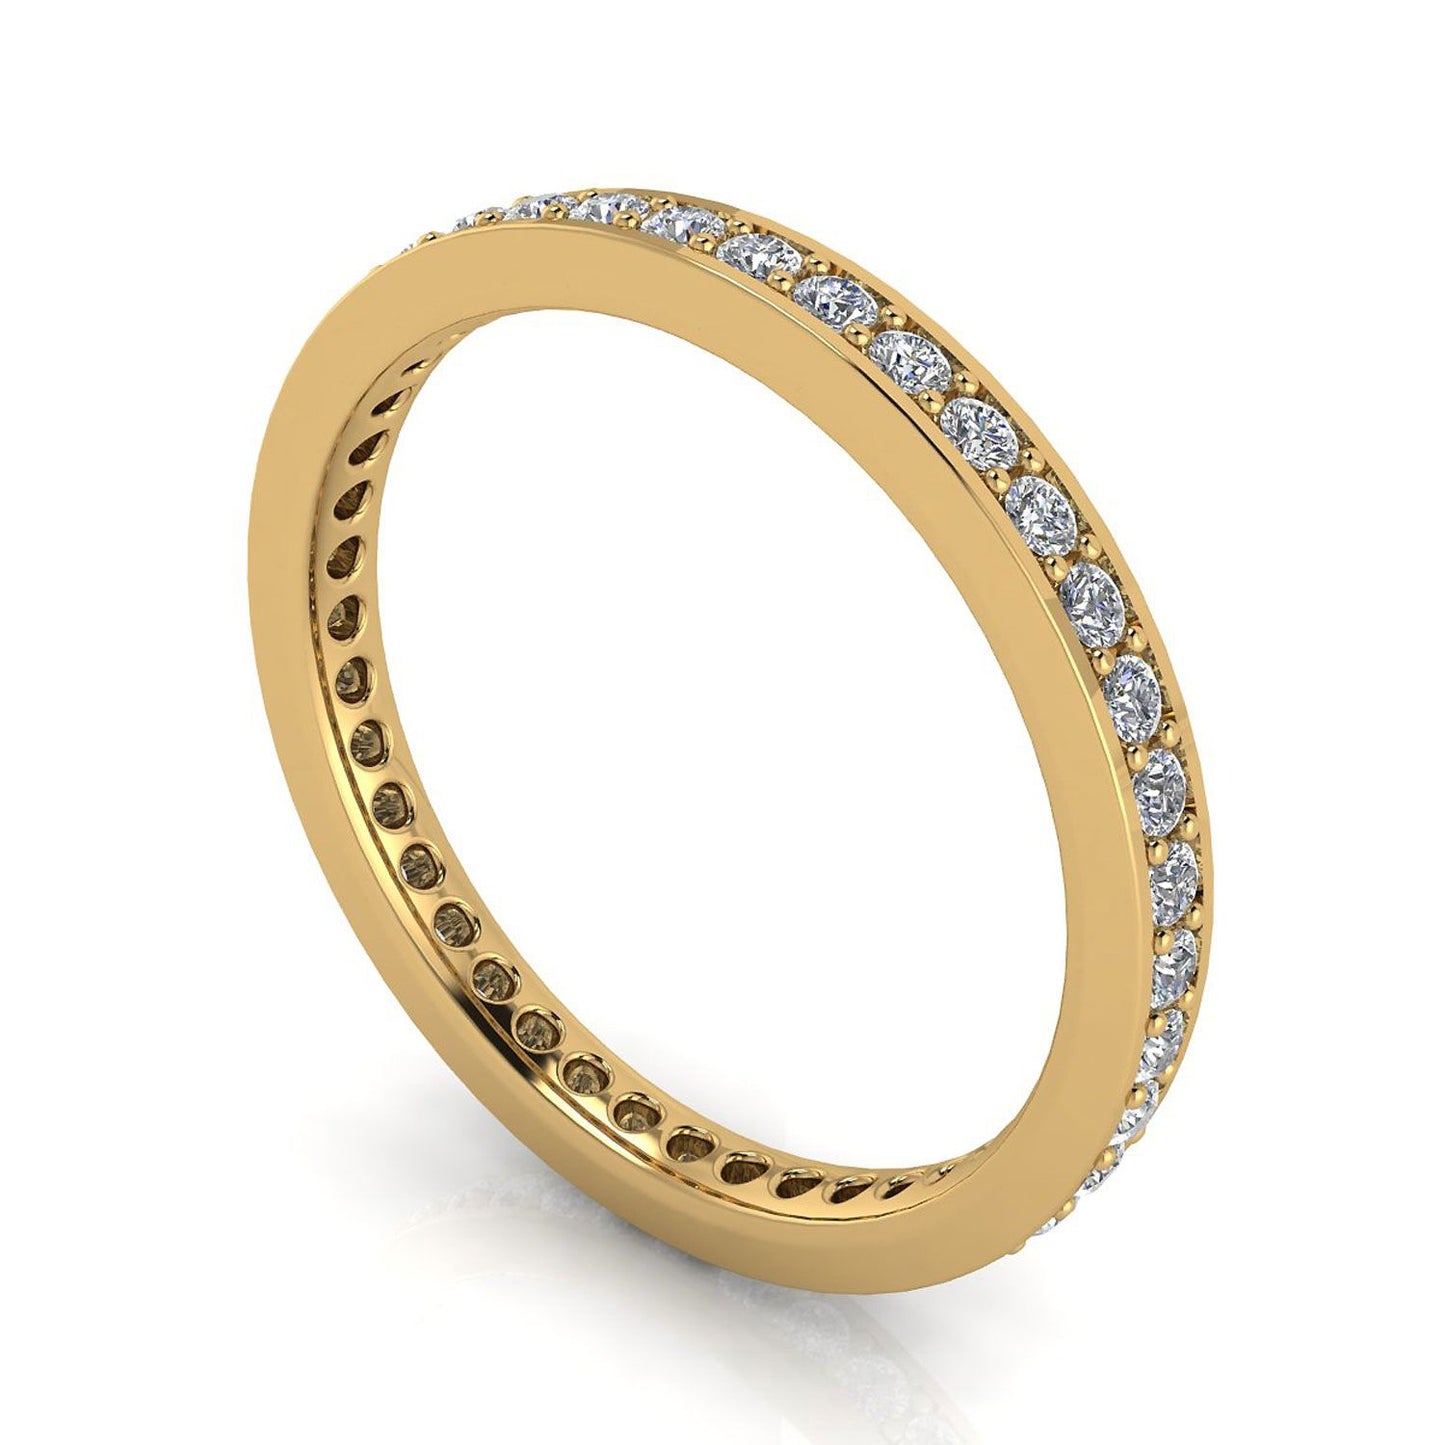 Round Brilliant Cut Diamond Channel Pave Set Eternity Ring In 14k Yellow Gold  (0.74ct. Tw.) Ring Size 8